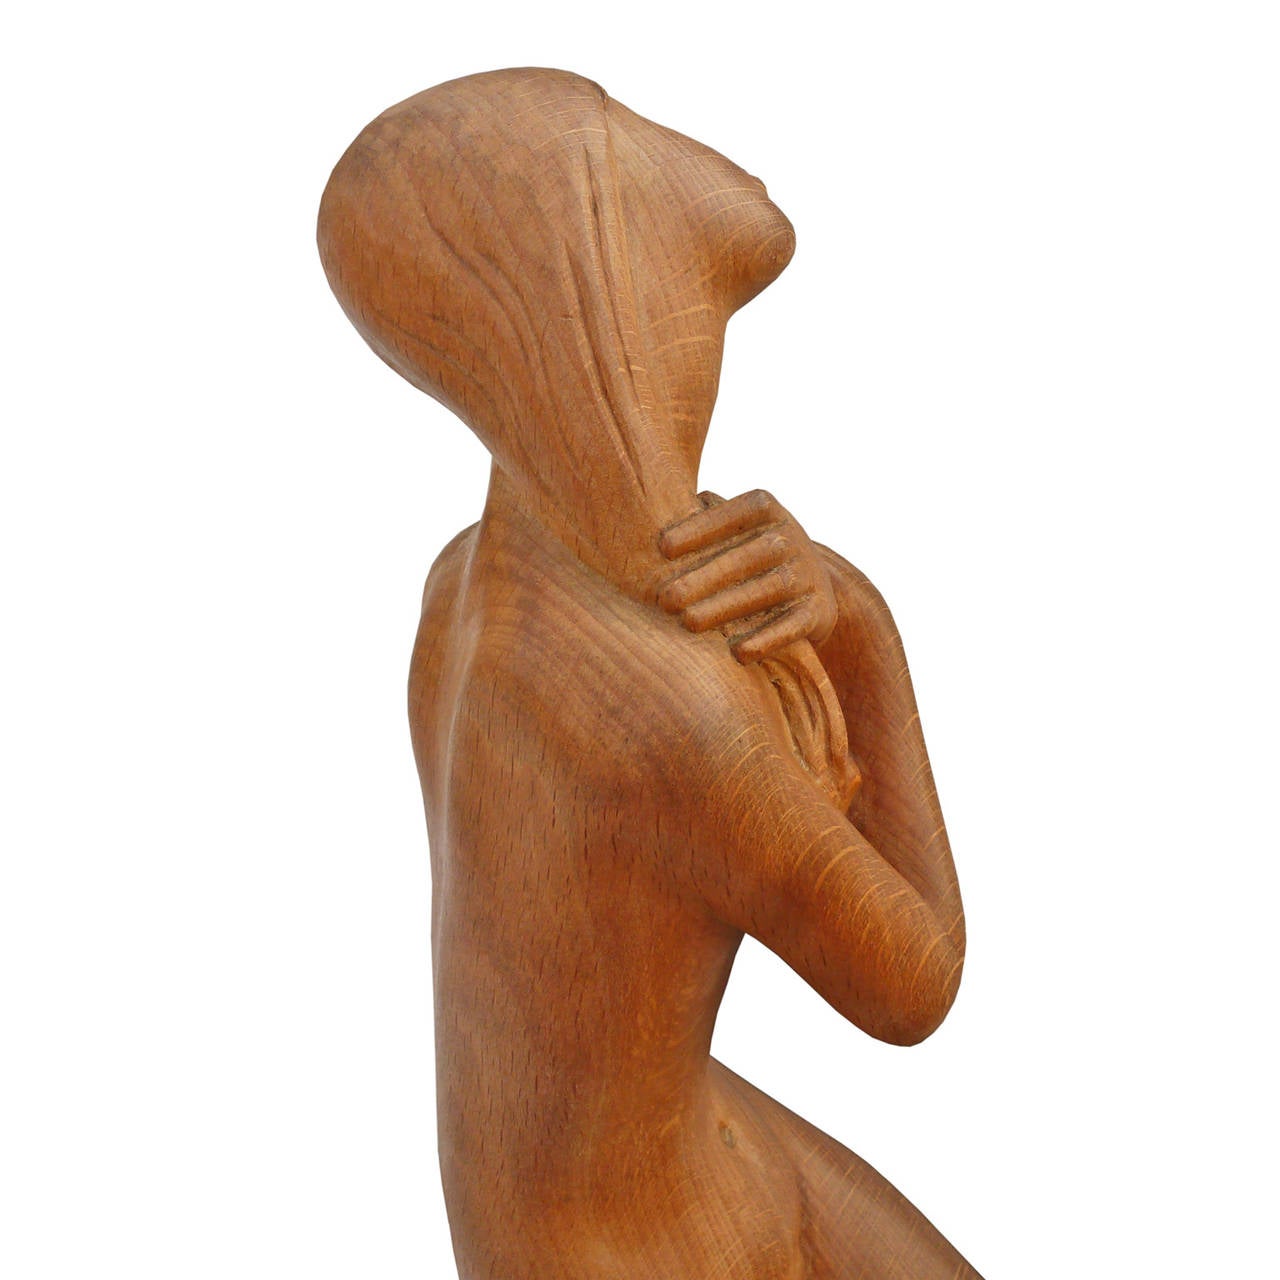 20th Century Luis Sanguino Hand-Carved Mahogany Sculpture of a Nude Woman